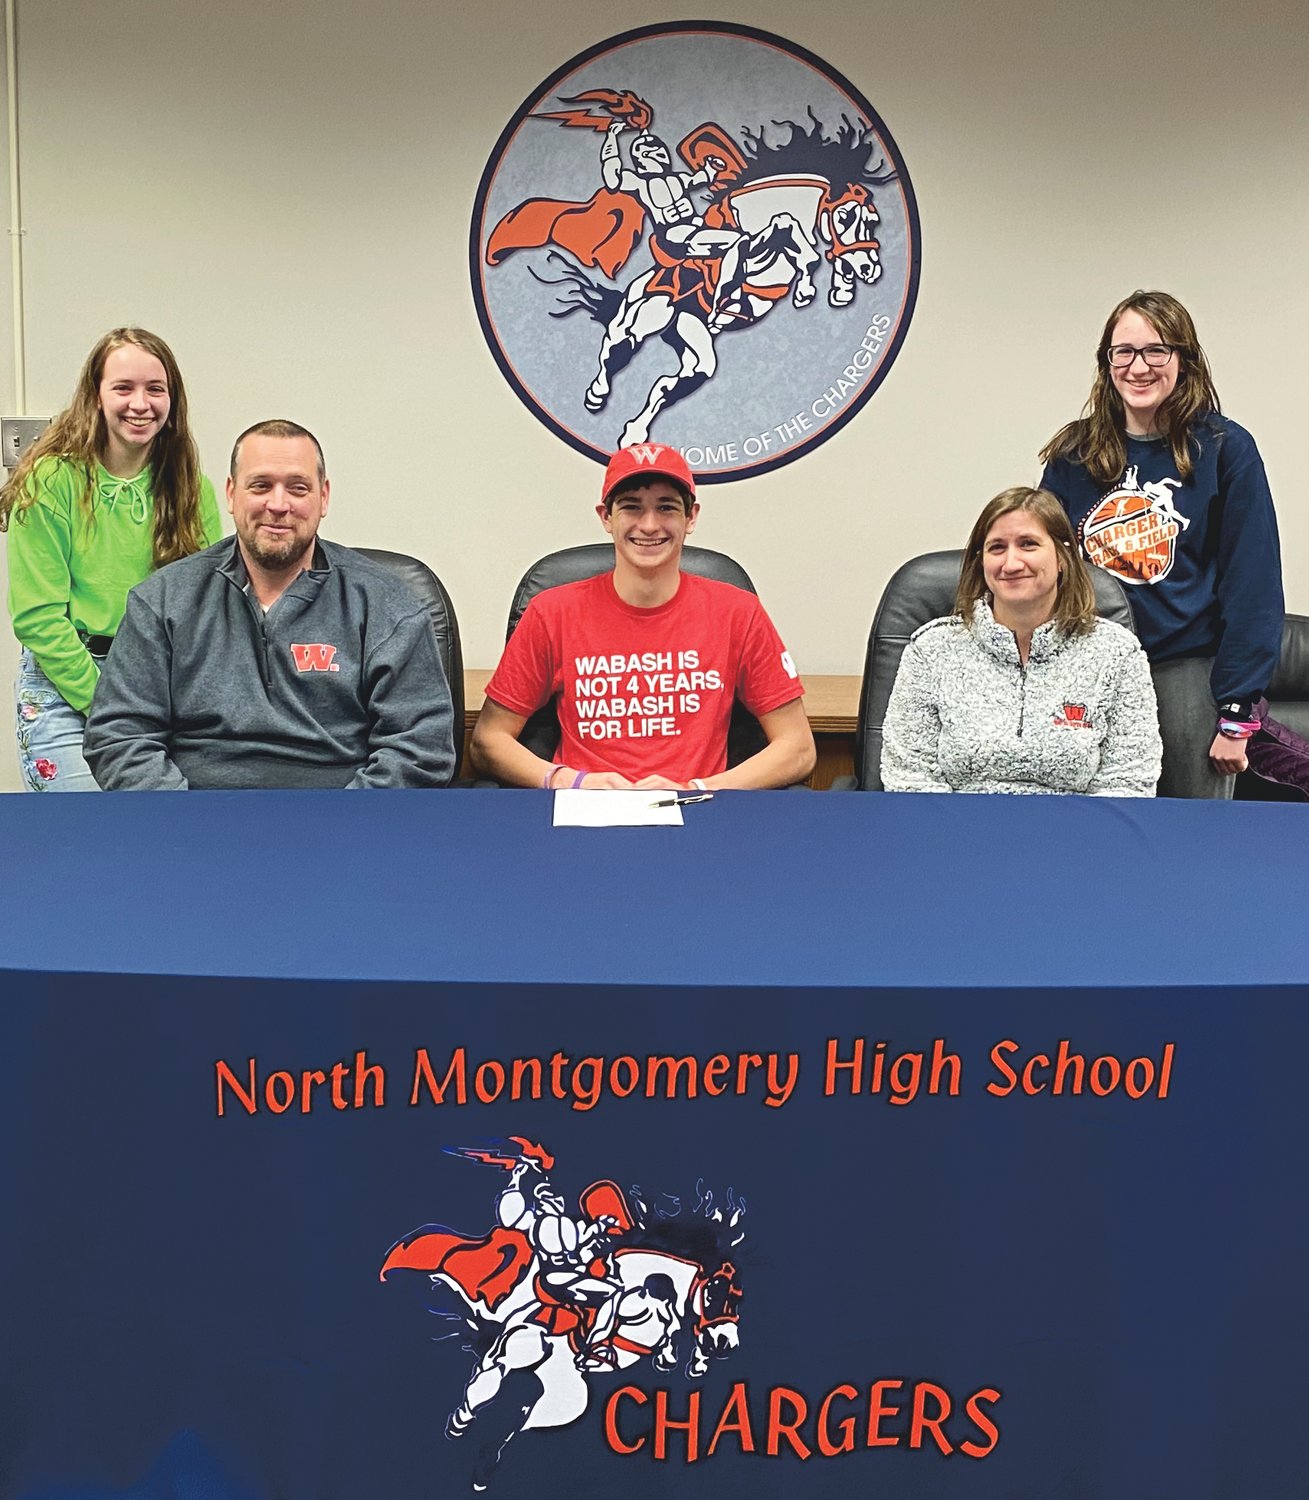 Jaron Bradford has committed to continue his academic and track and field career at Wabash College next fall. The North Montgomery senior was joined in celebration last weekend with his parents, Andy and Melissa Bradford, and his sisters Kylie and Krestyn.